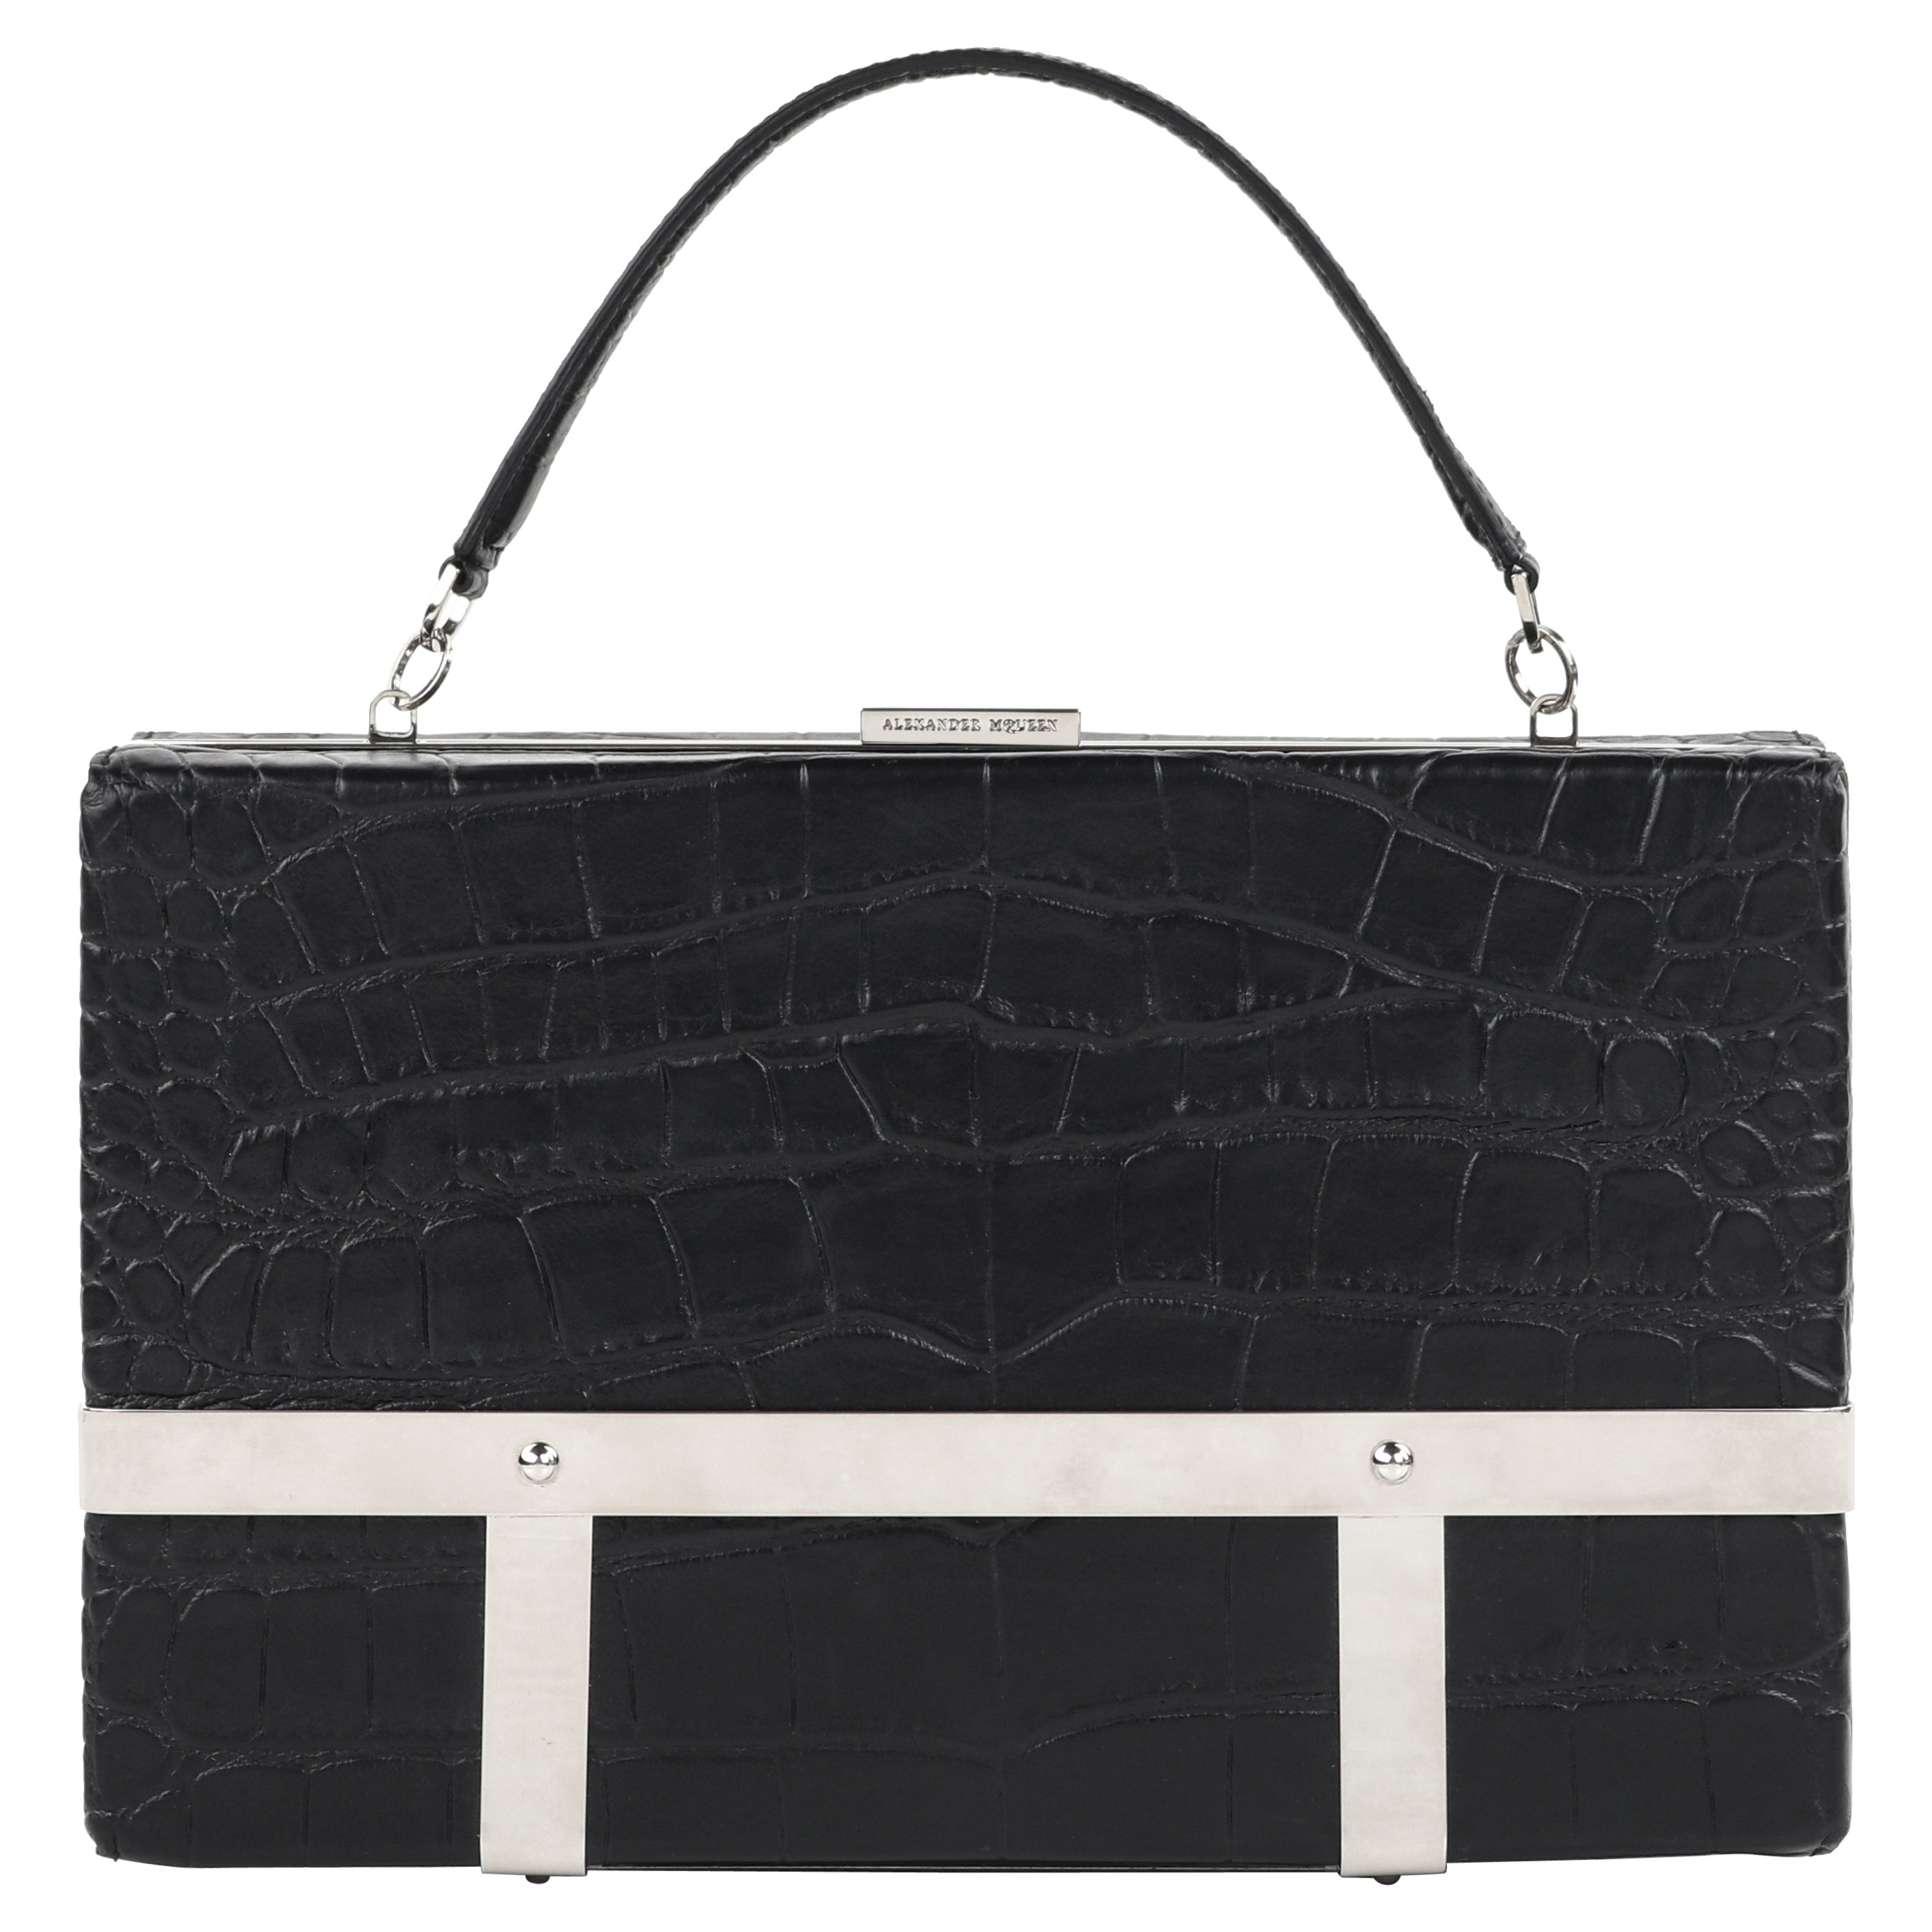 ALEXANDER McQUEEN Pre-Fall 2015 Croc Embossed Leather Metal Cage Box Handbag For Sale